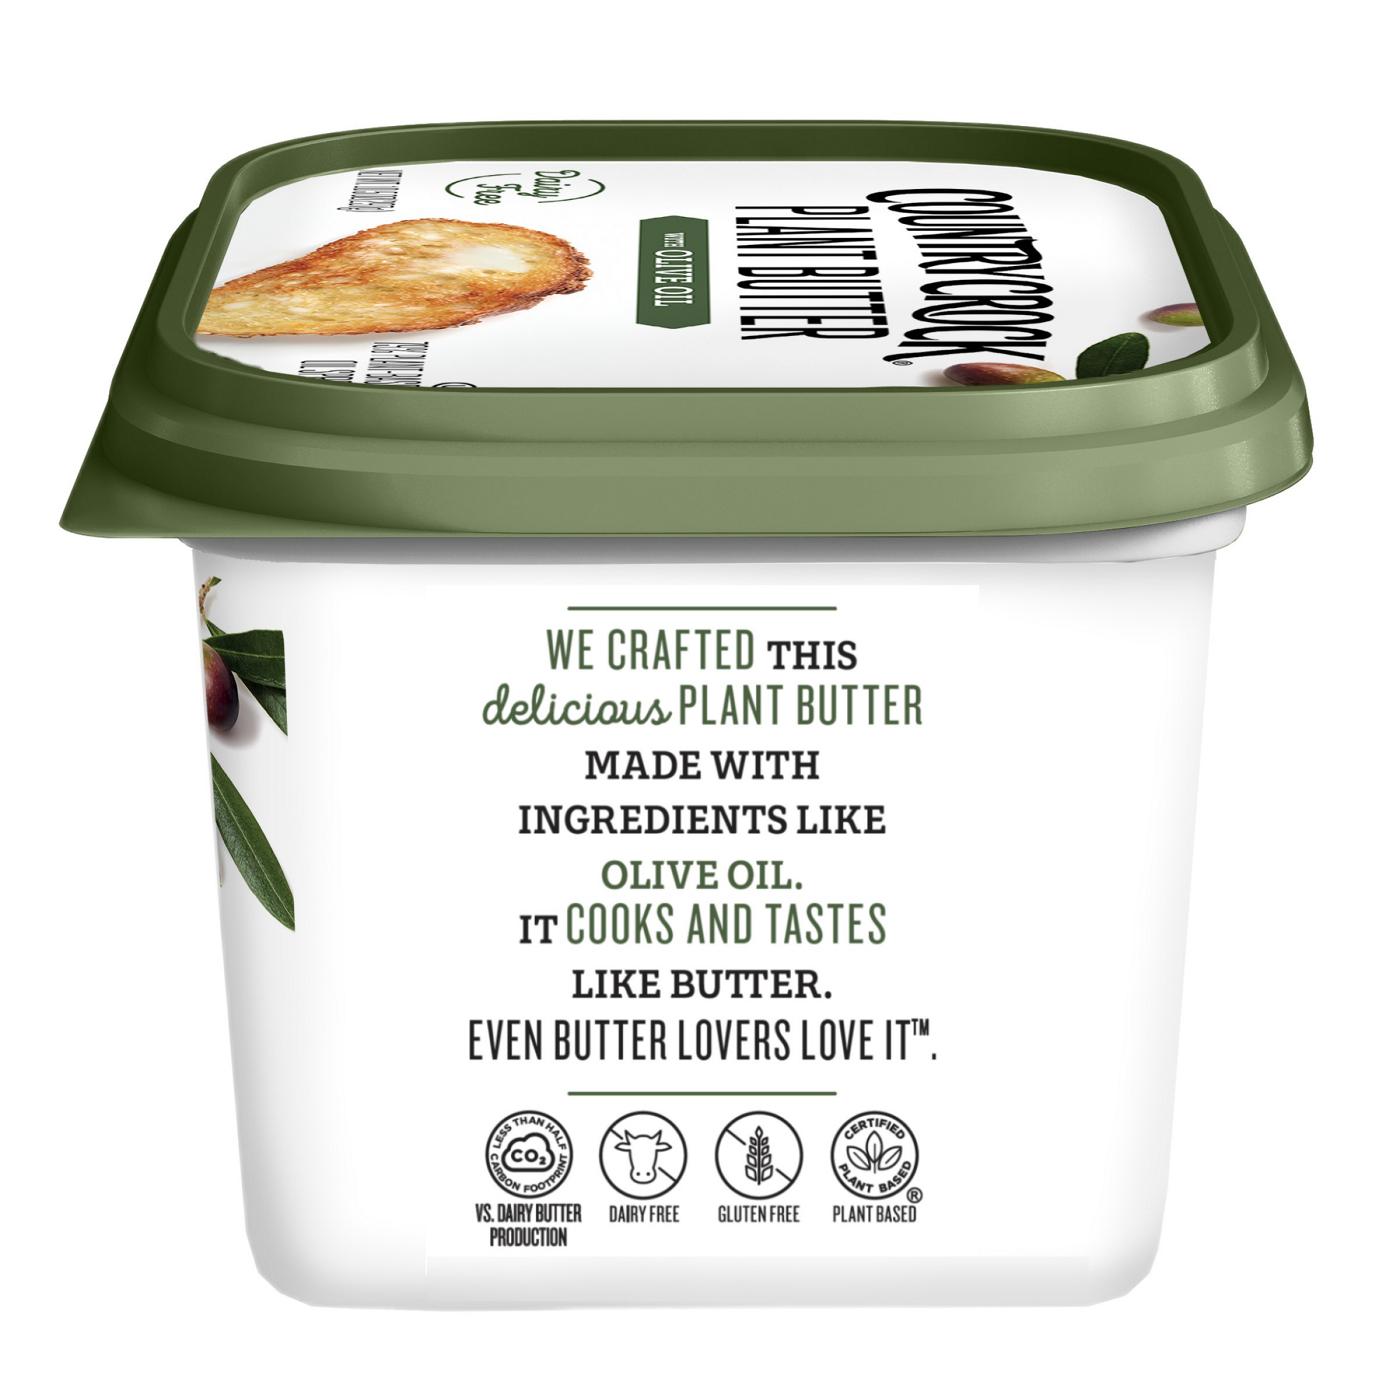 Country Crock Dairy Free Plant Butter with Olive Oil Spread; image 7 of 10